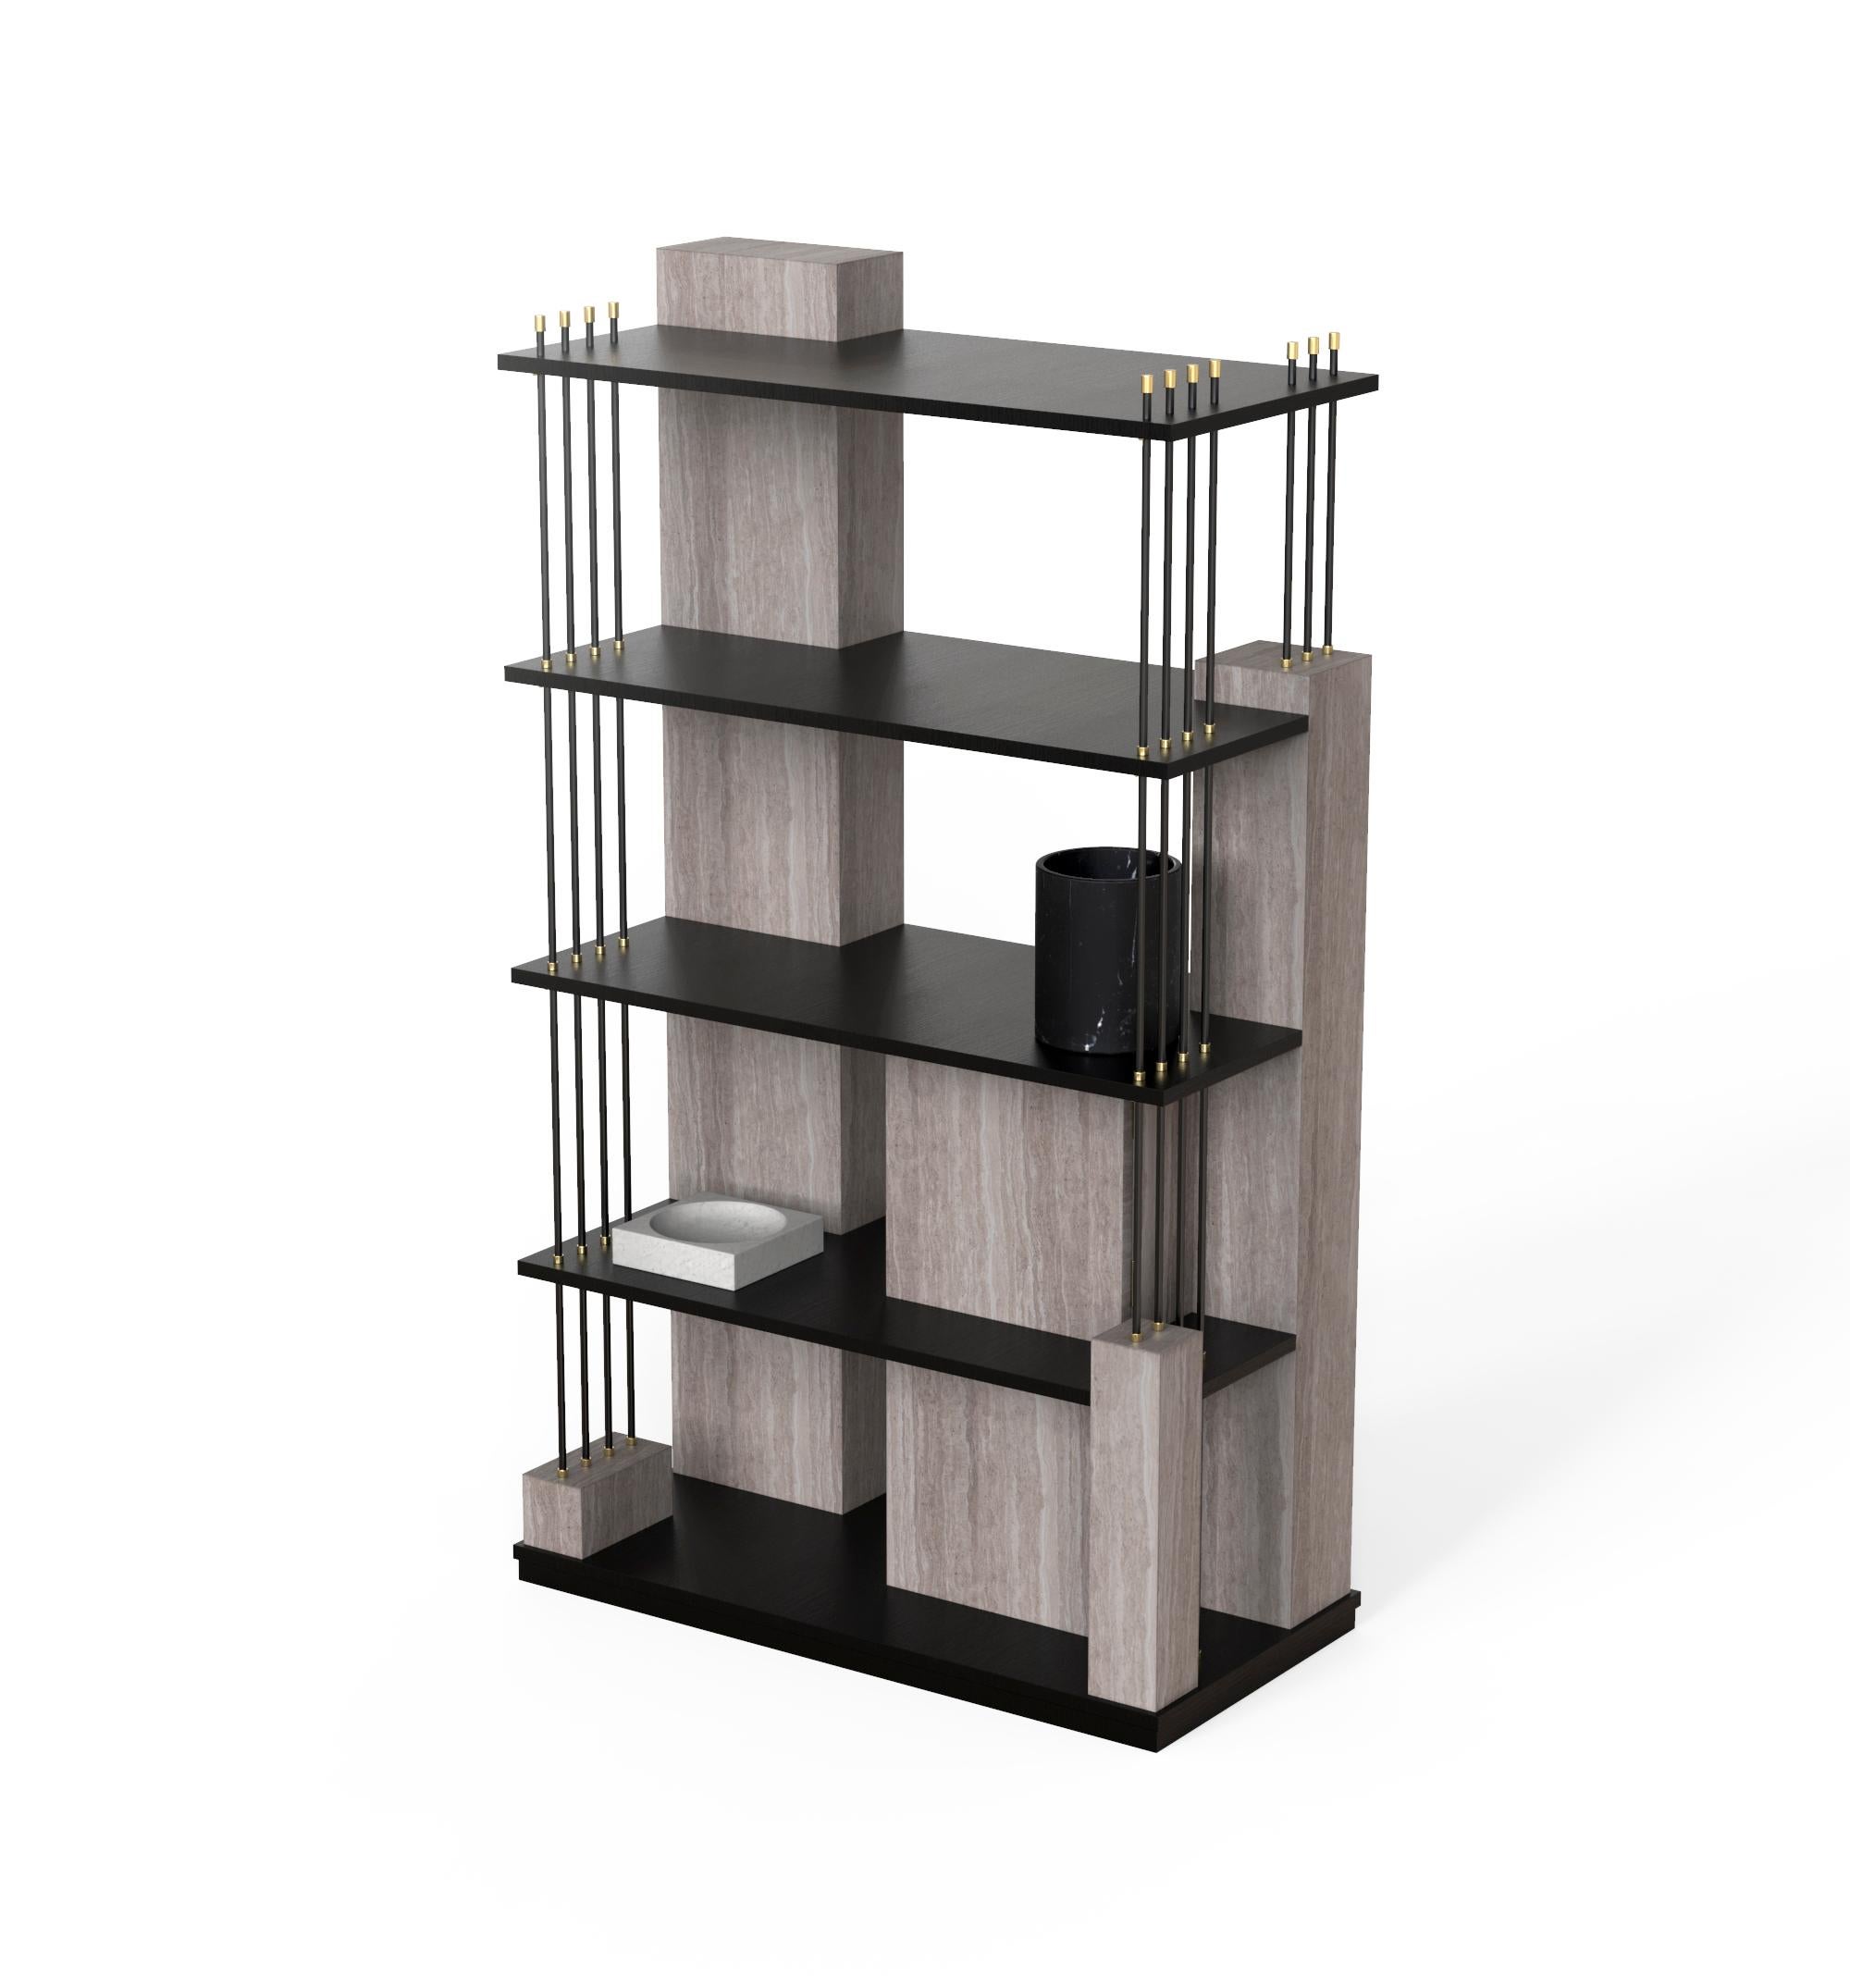 Manhattan bookcase by Marmi Serafini
Materials: Oak Grey marble, wood, brass, metal.
Dimensions: D 50 x W 102 x H 175 cm
Available in other marbles.

As the famous New York skyline, this elegant shelves bookcase is made up by model sized marble